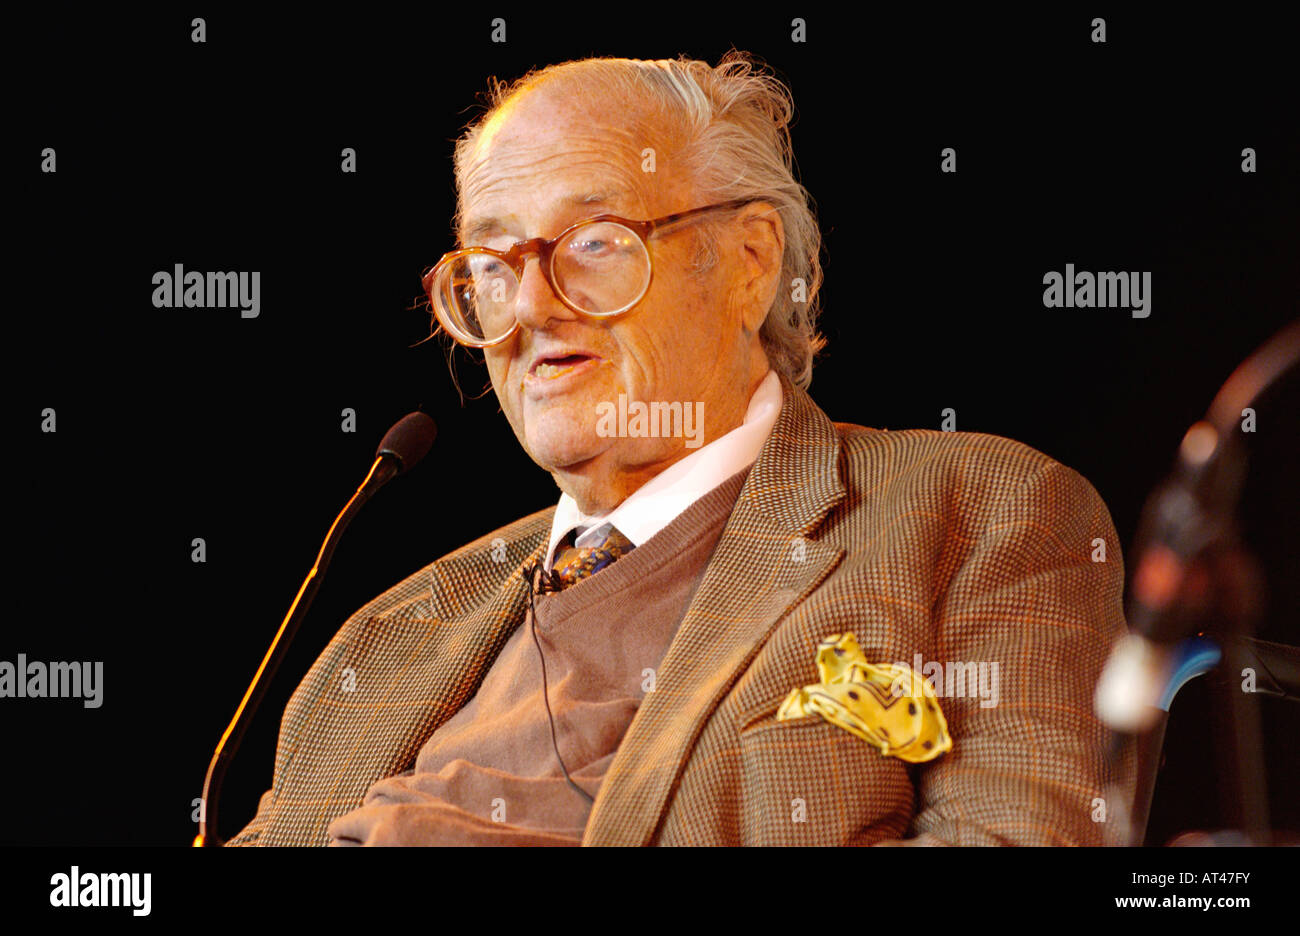 Sir John Mortimer CBE QC English barrister dramatist and author at The Guardian Hay Festival 2007 Hay on Wye Powys Wales UK EU Stock Photo